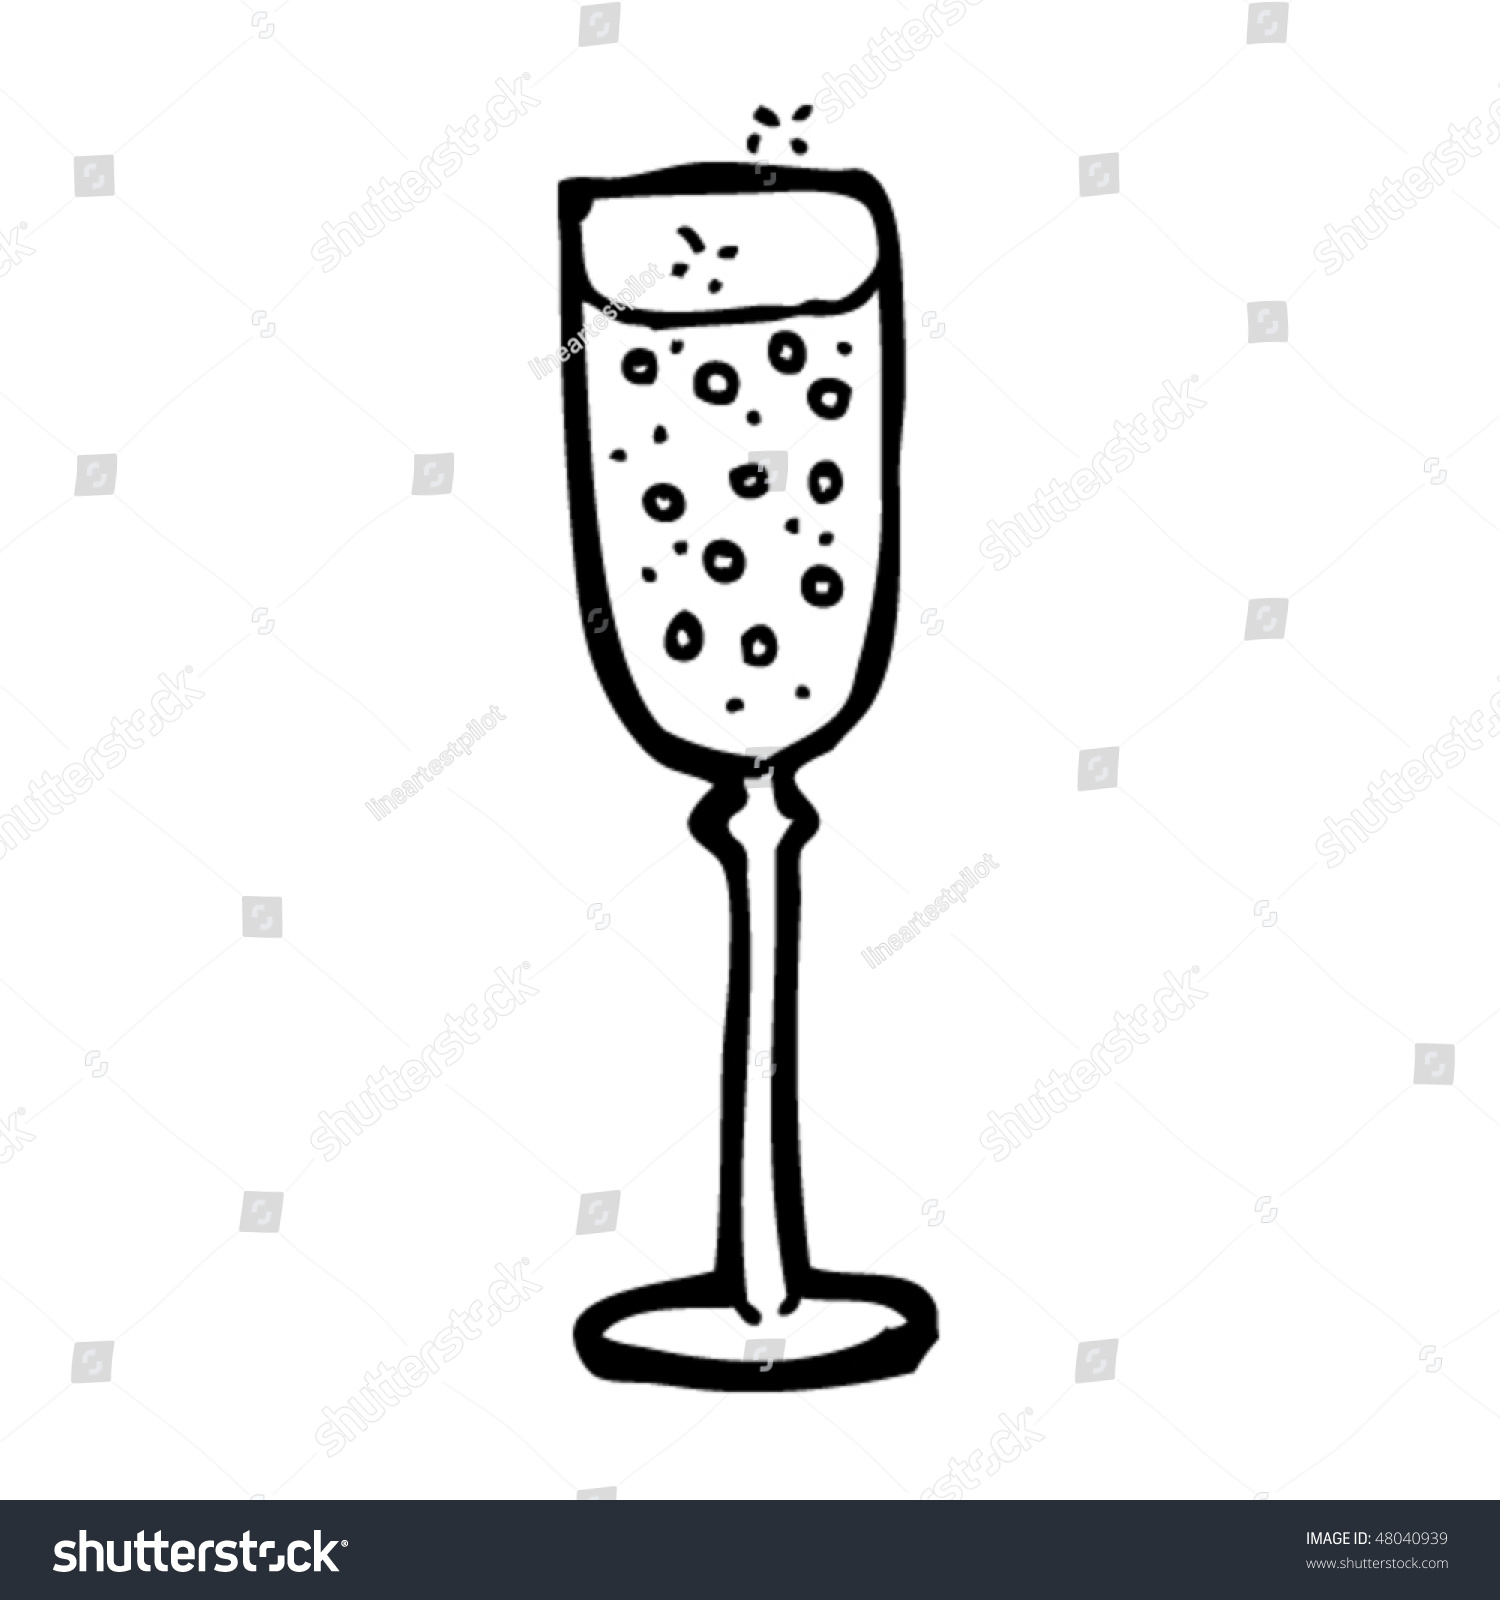 Champagne Glass Drawing Stock Vector Illustration 48040939 : Shutterstock